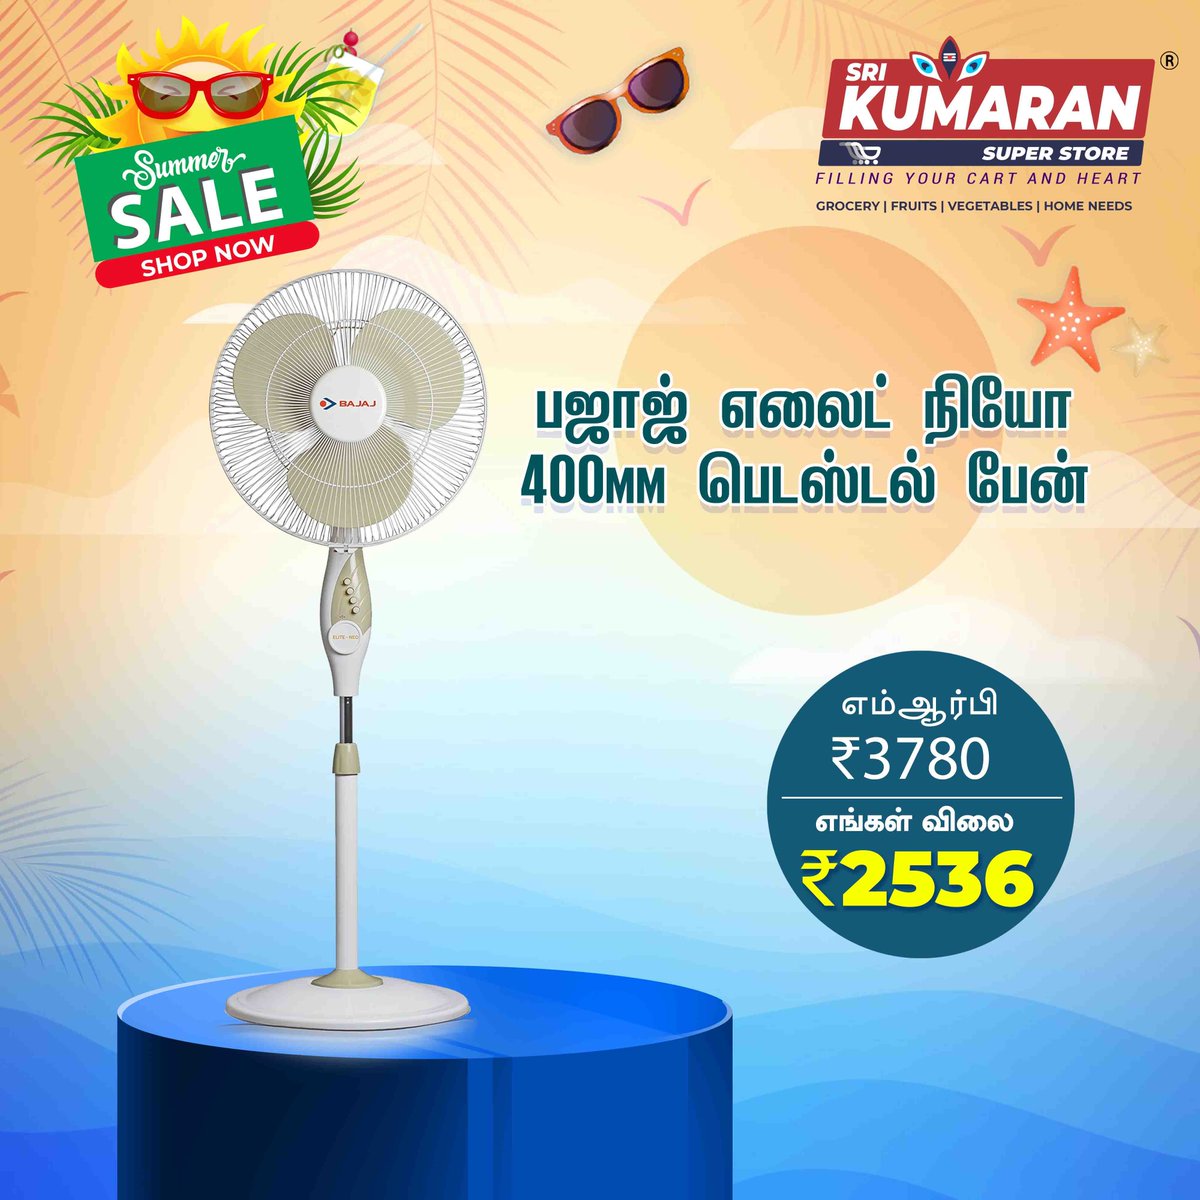 Keep your cool this summer with the Bajaj Elite Neo Pedestal Fan! Now on sale at Sri Kumaran Super Store. Don't miss out!☀️☀️☀️

For Enquiries Contact:
☎ 094451 94451

#summersale #bajaj #pedestalfan #fan #discount #srikumaransuperstore #pollachi #cool #grocery #supermarket